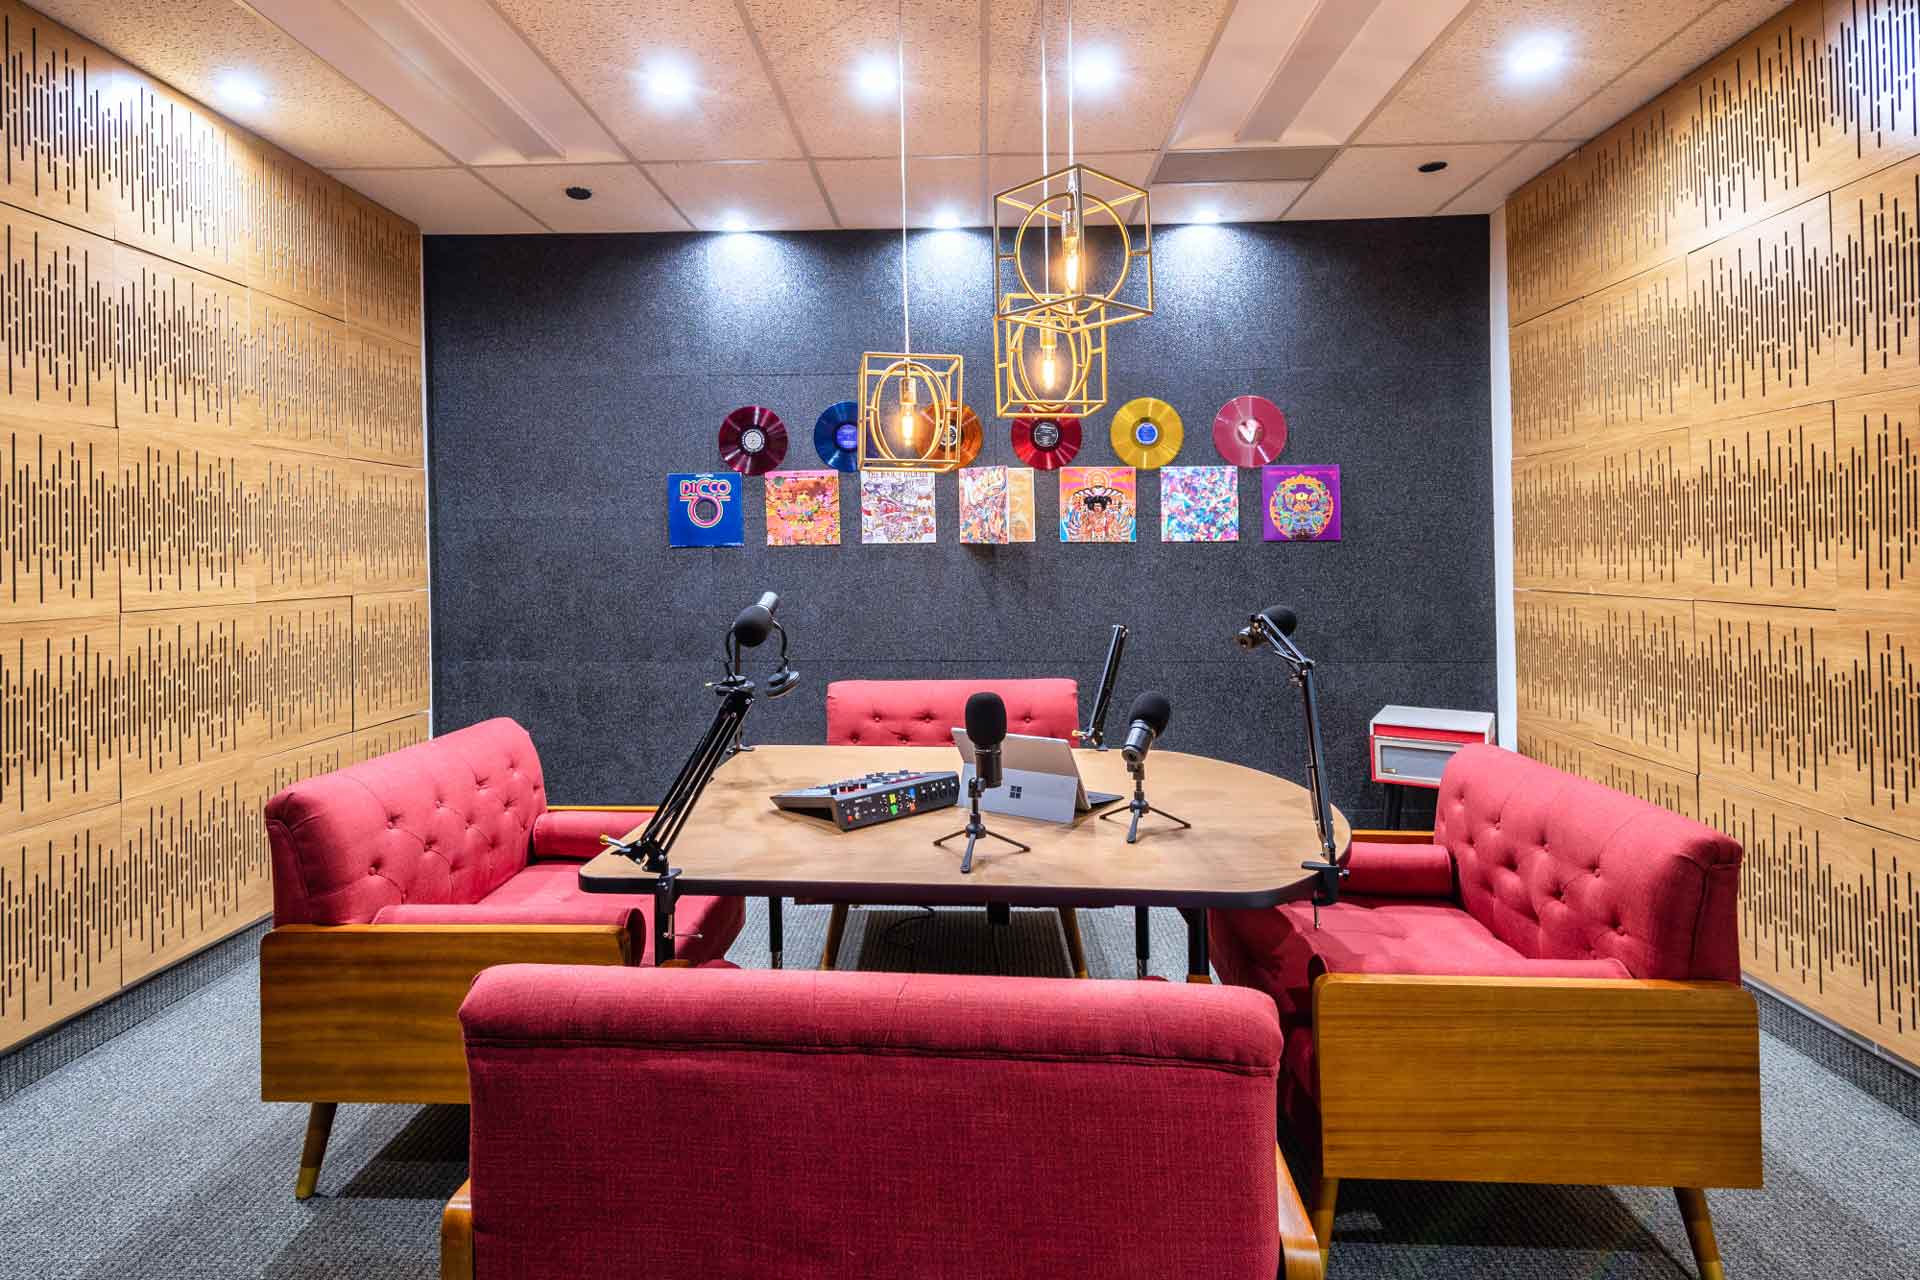 Podcast Room in CUBExec at Uptown Dallas. It has 4 red chairs and 4 mics.